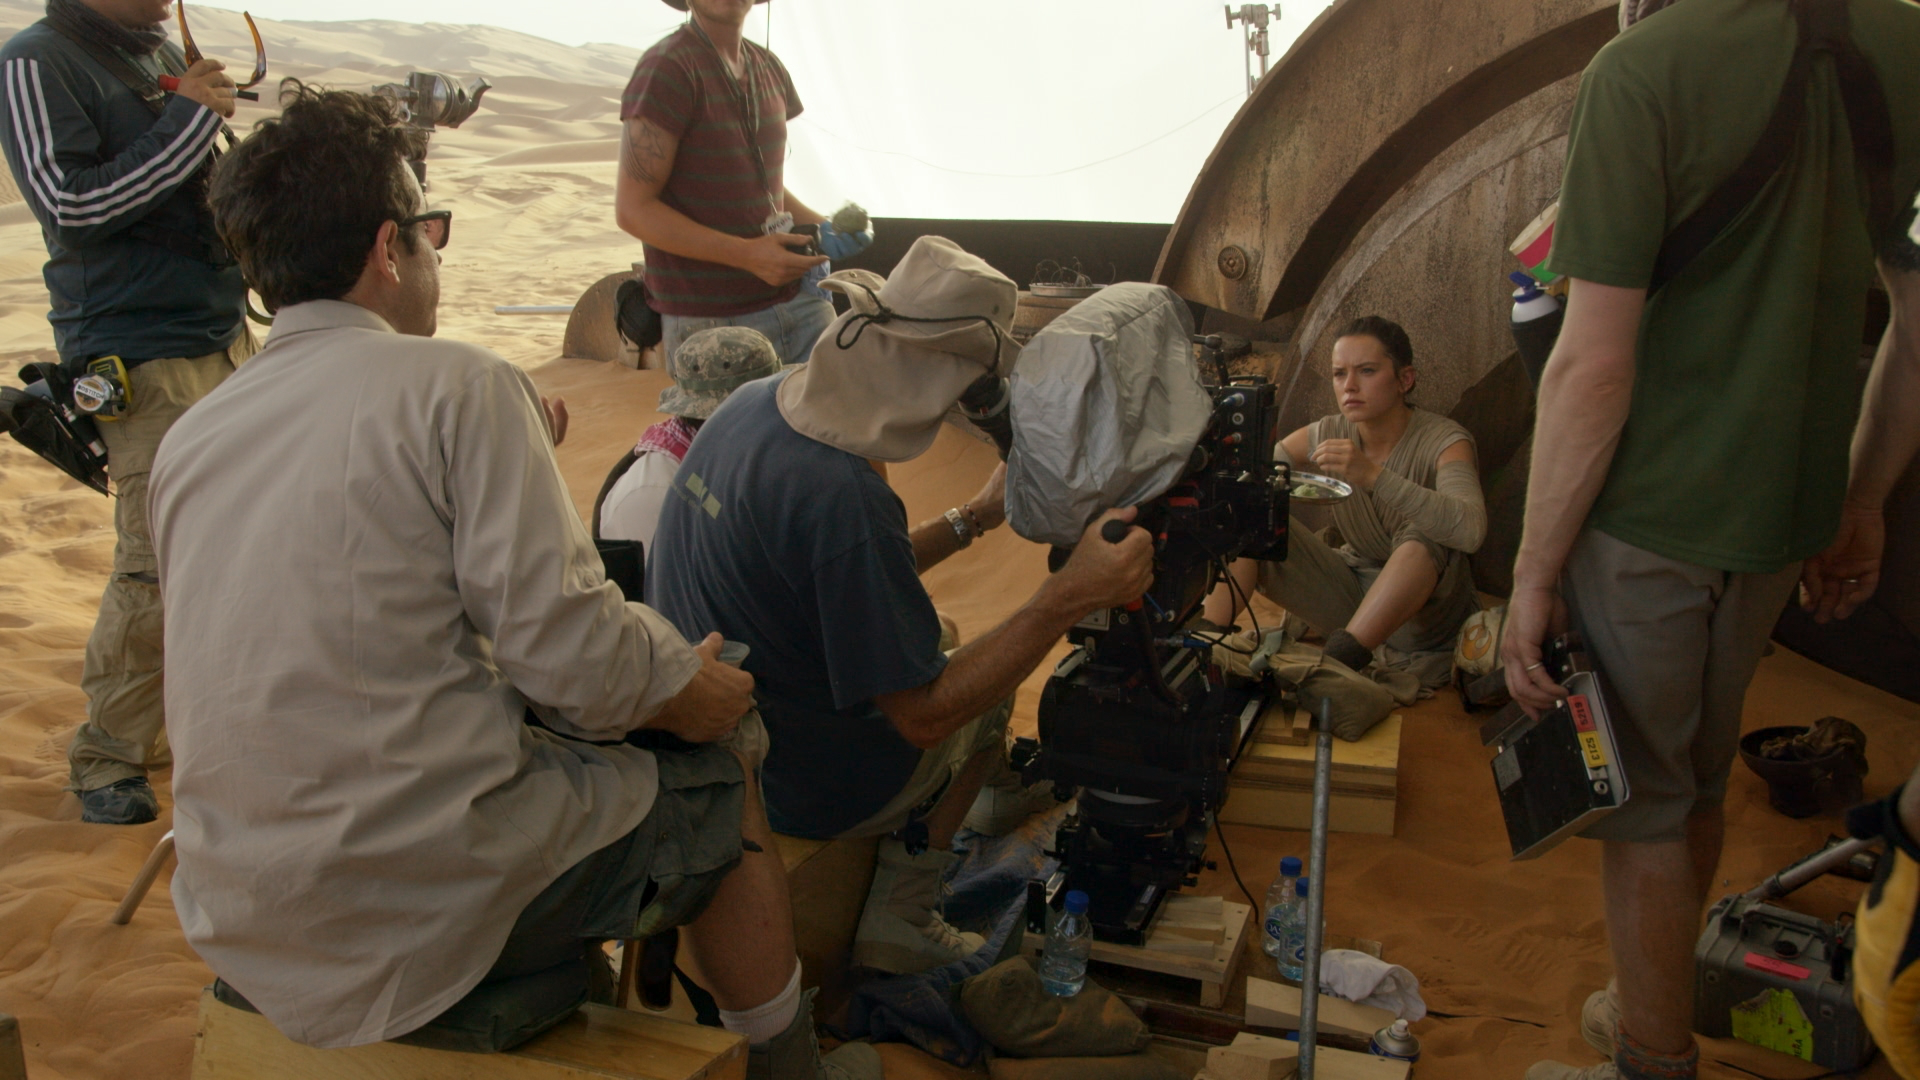 New Clips from “Star Wars: The Force Awakens” Bonus Features